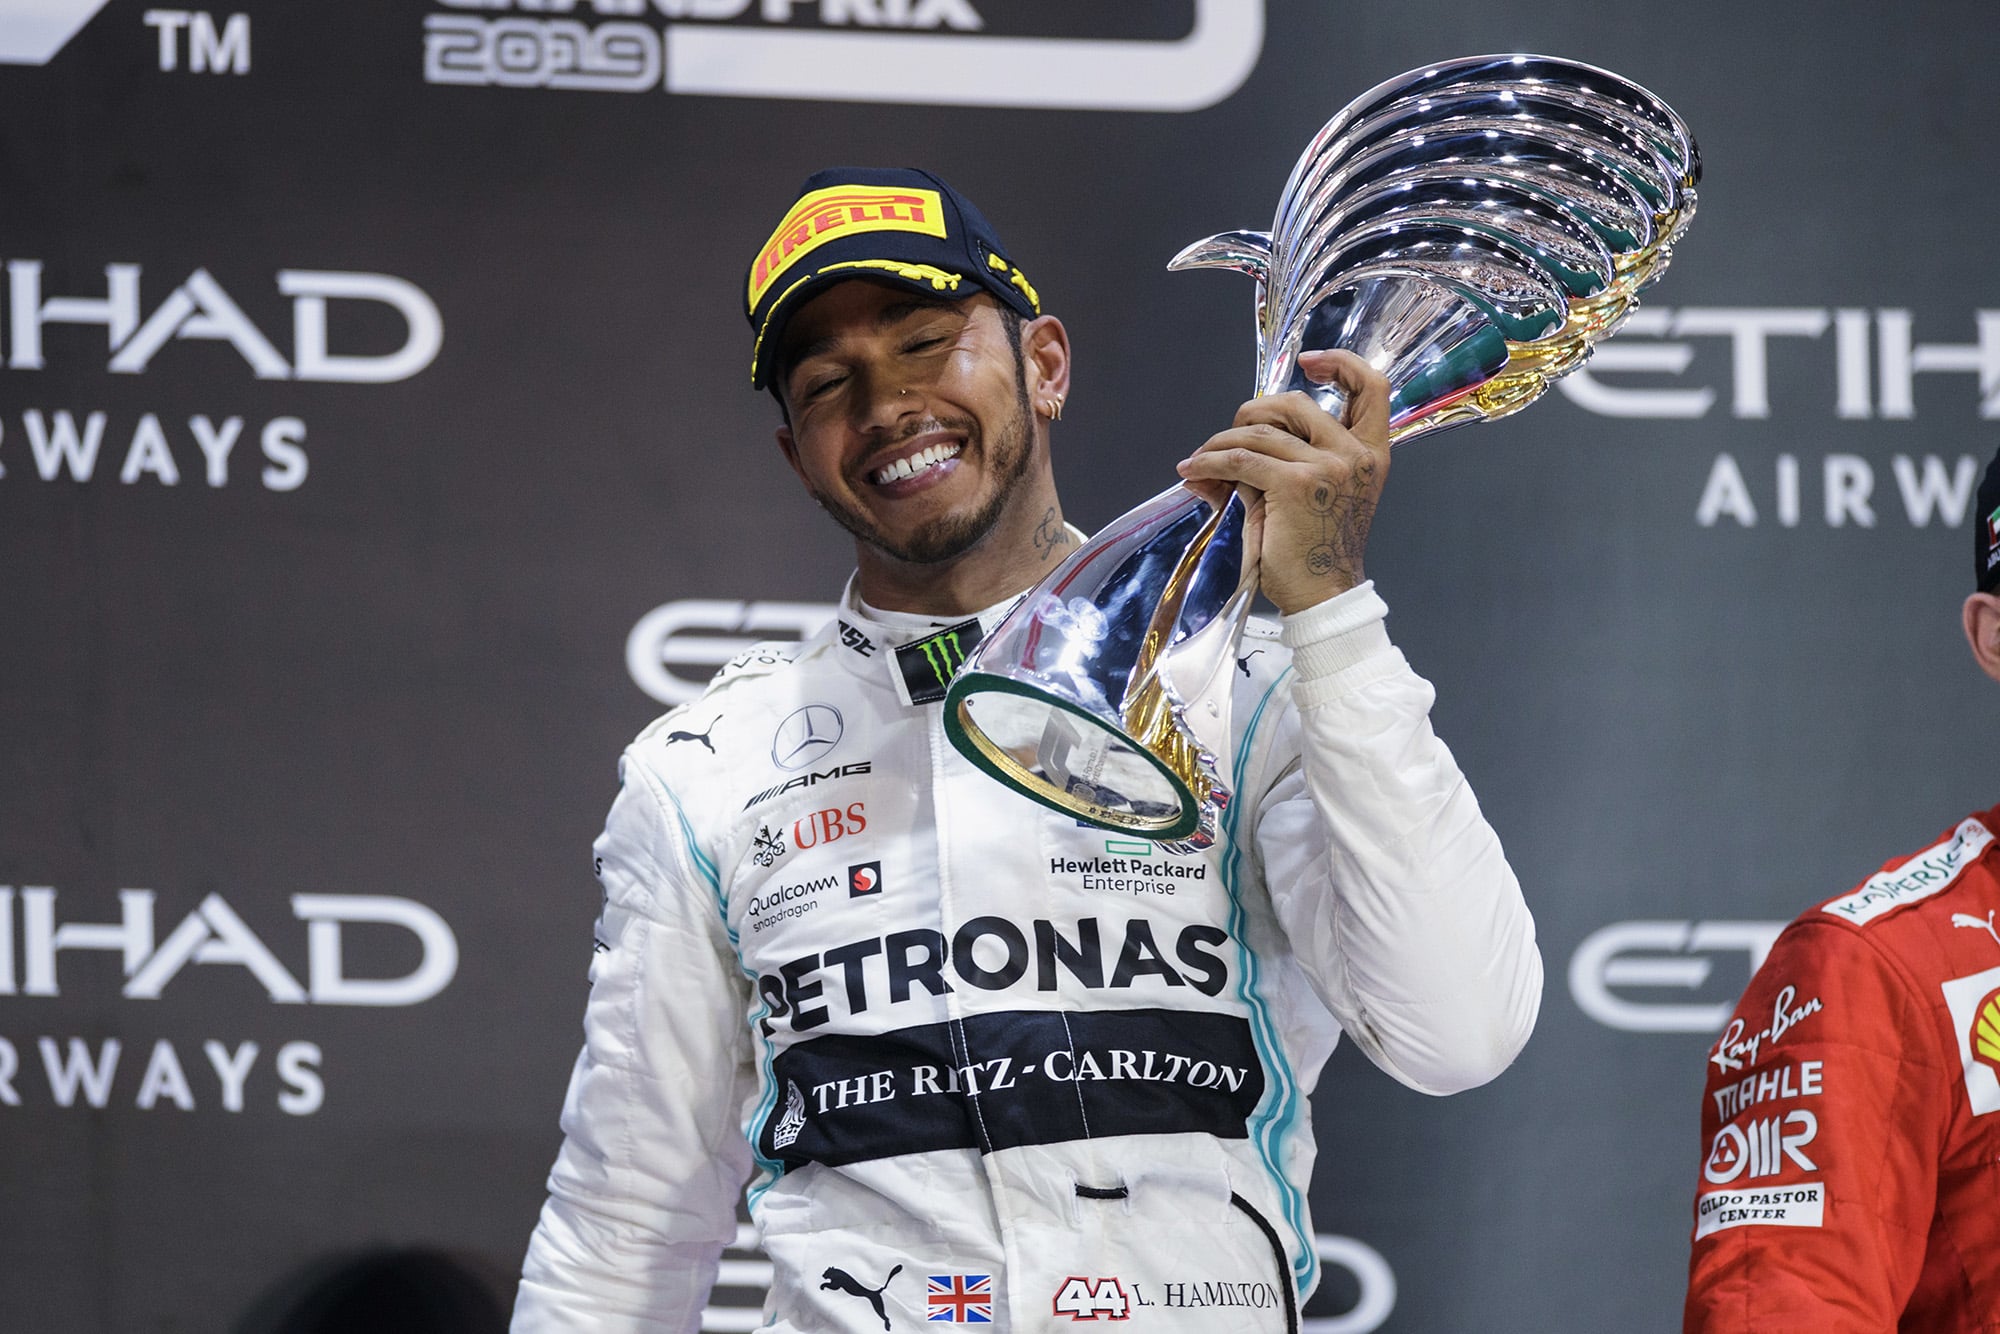 Lewis Hamilton smiles with the race-winning trophy from the 2019 F1 Abu Dhabi Grand Prix